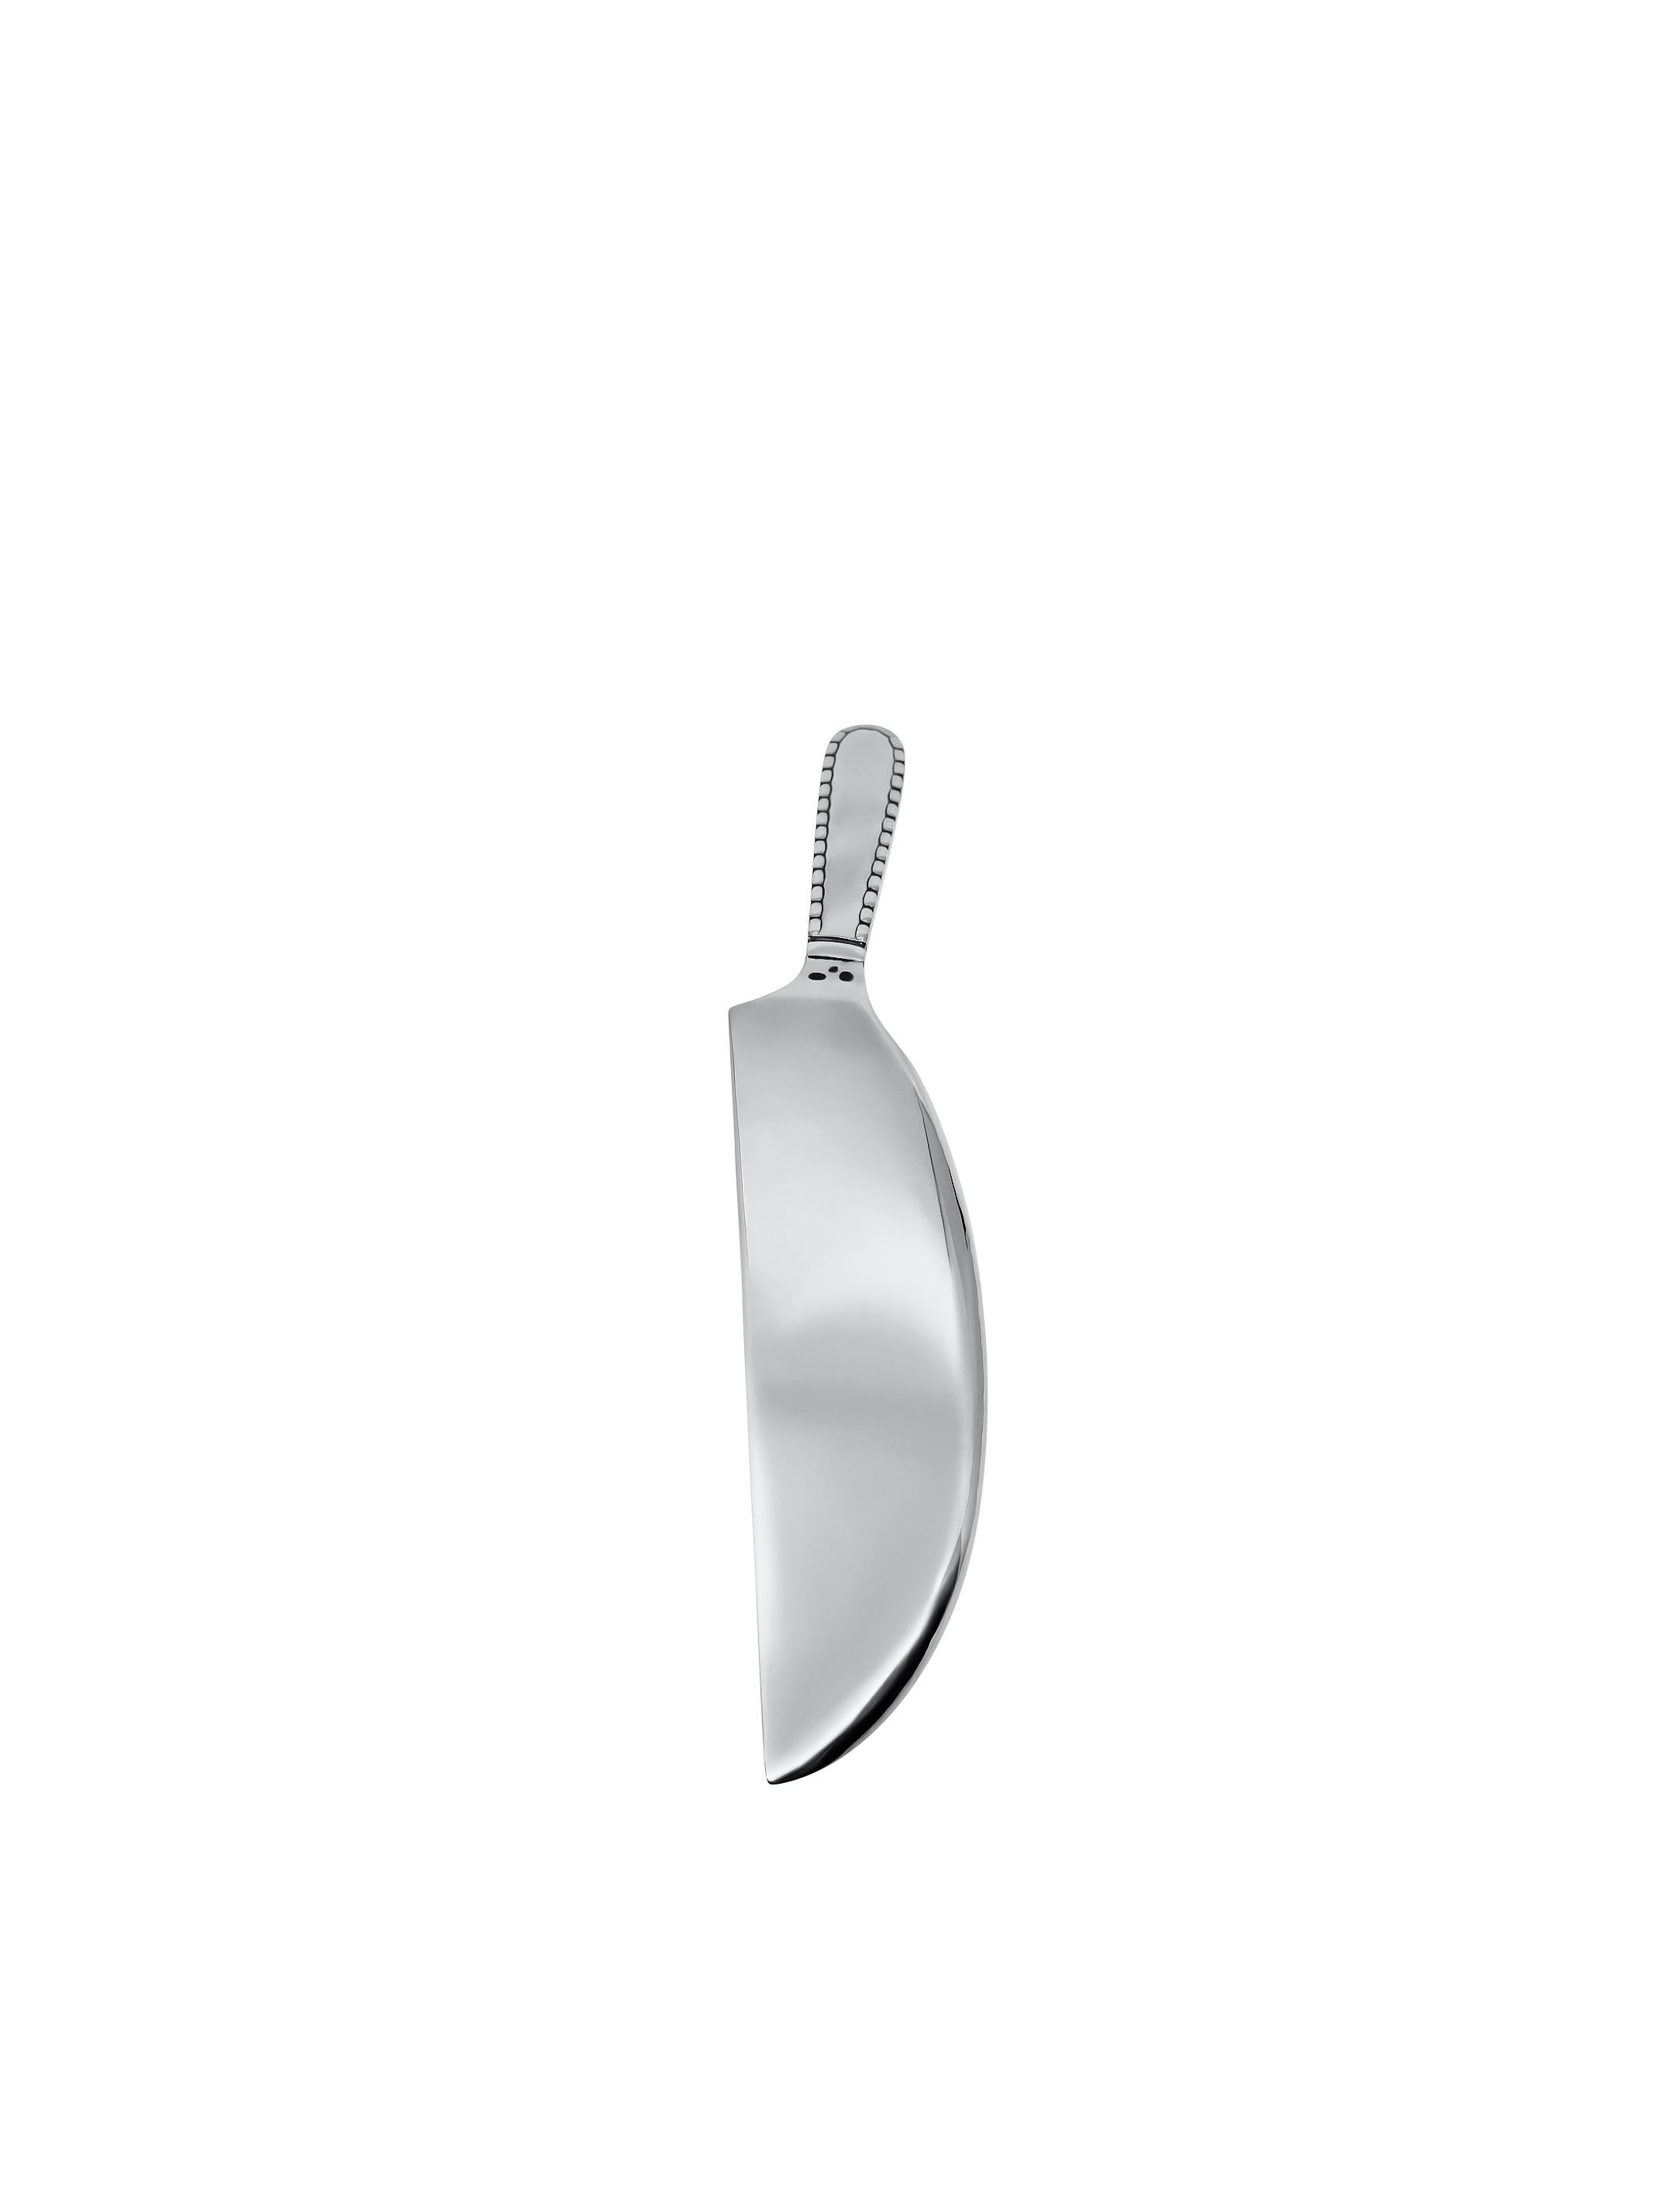 a sizable antique crumber crafted from 830 sterling silver in the early Georg Jensen Rope/Perle design. This crumber showcases meticulous hand hammering, evident in its wide scoop, reflecting superior craftsmanship. The hollow handle features